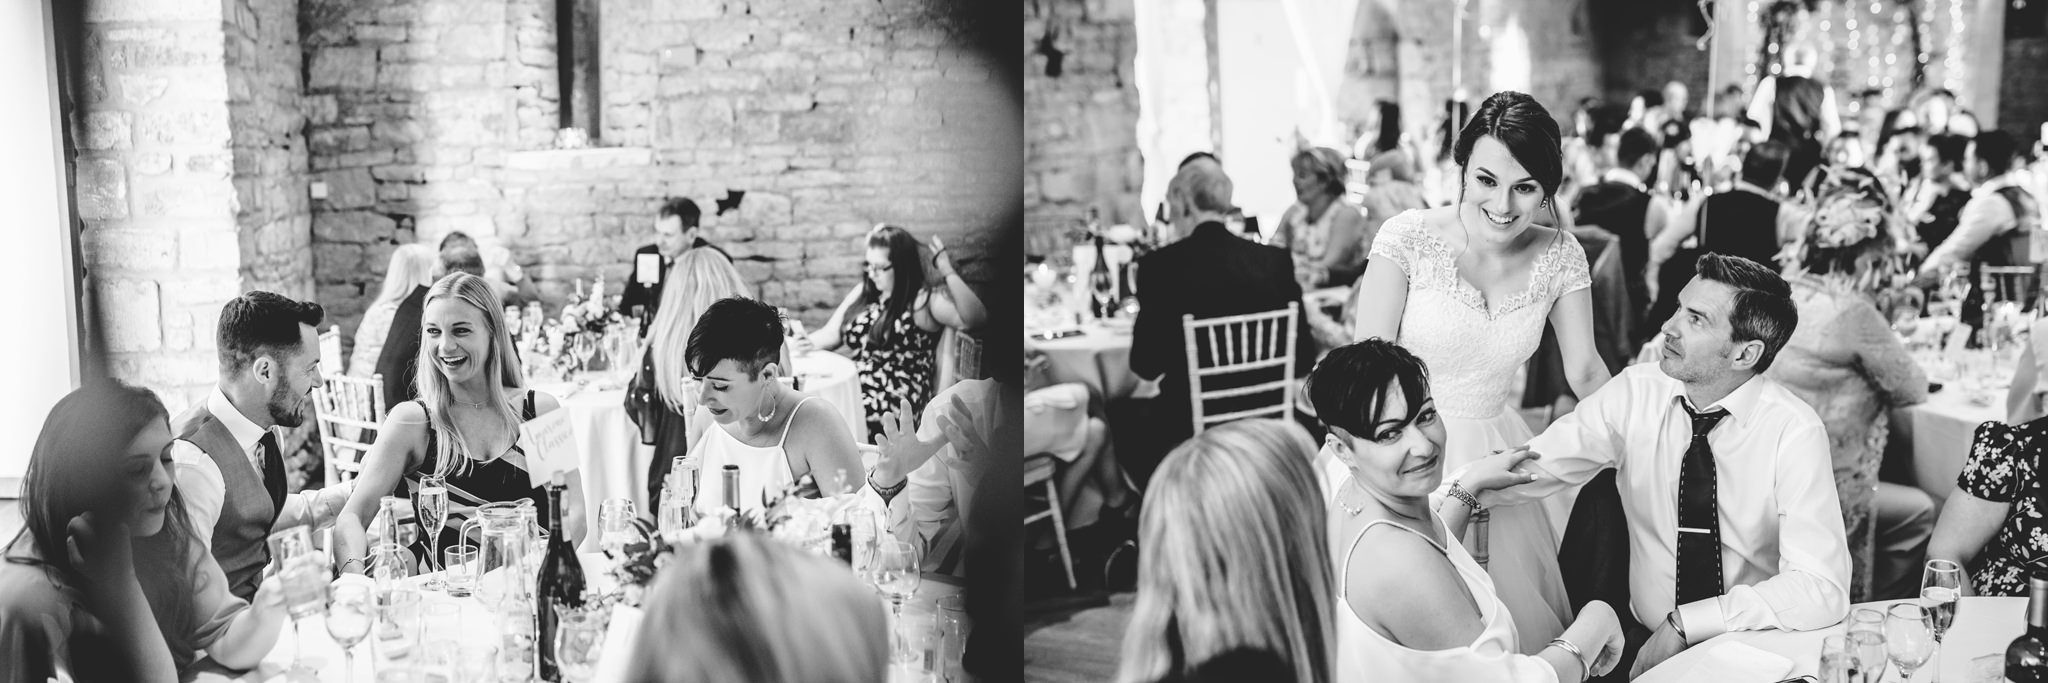 Wedding guests at the great tythe barn